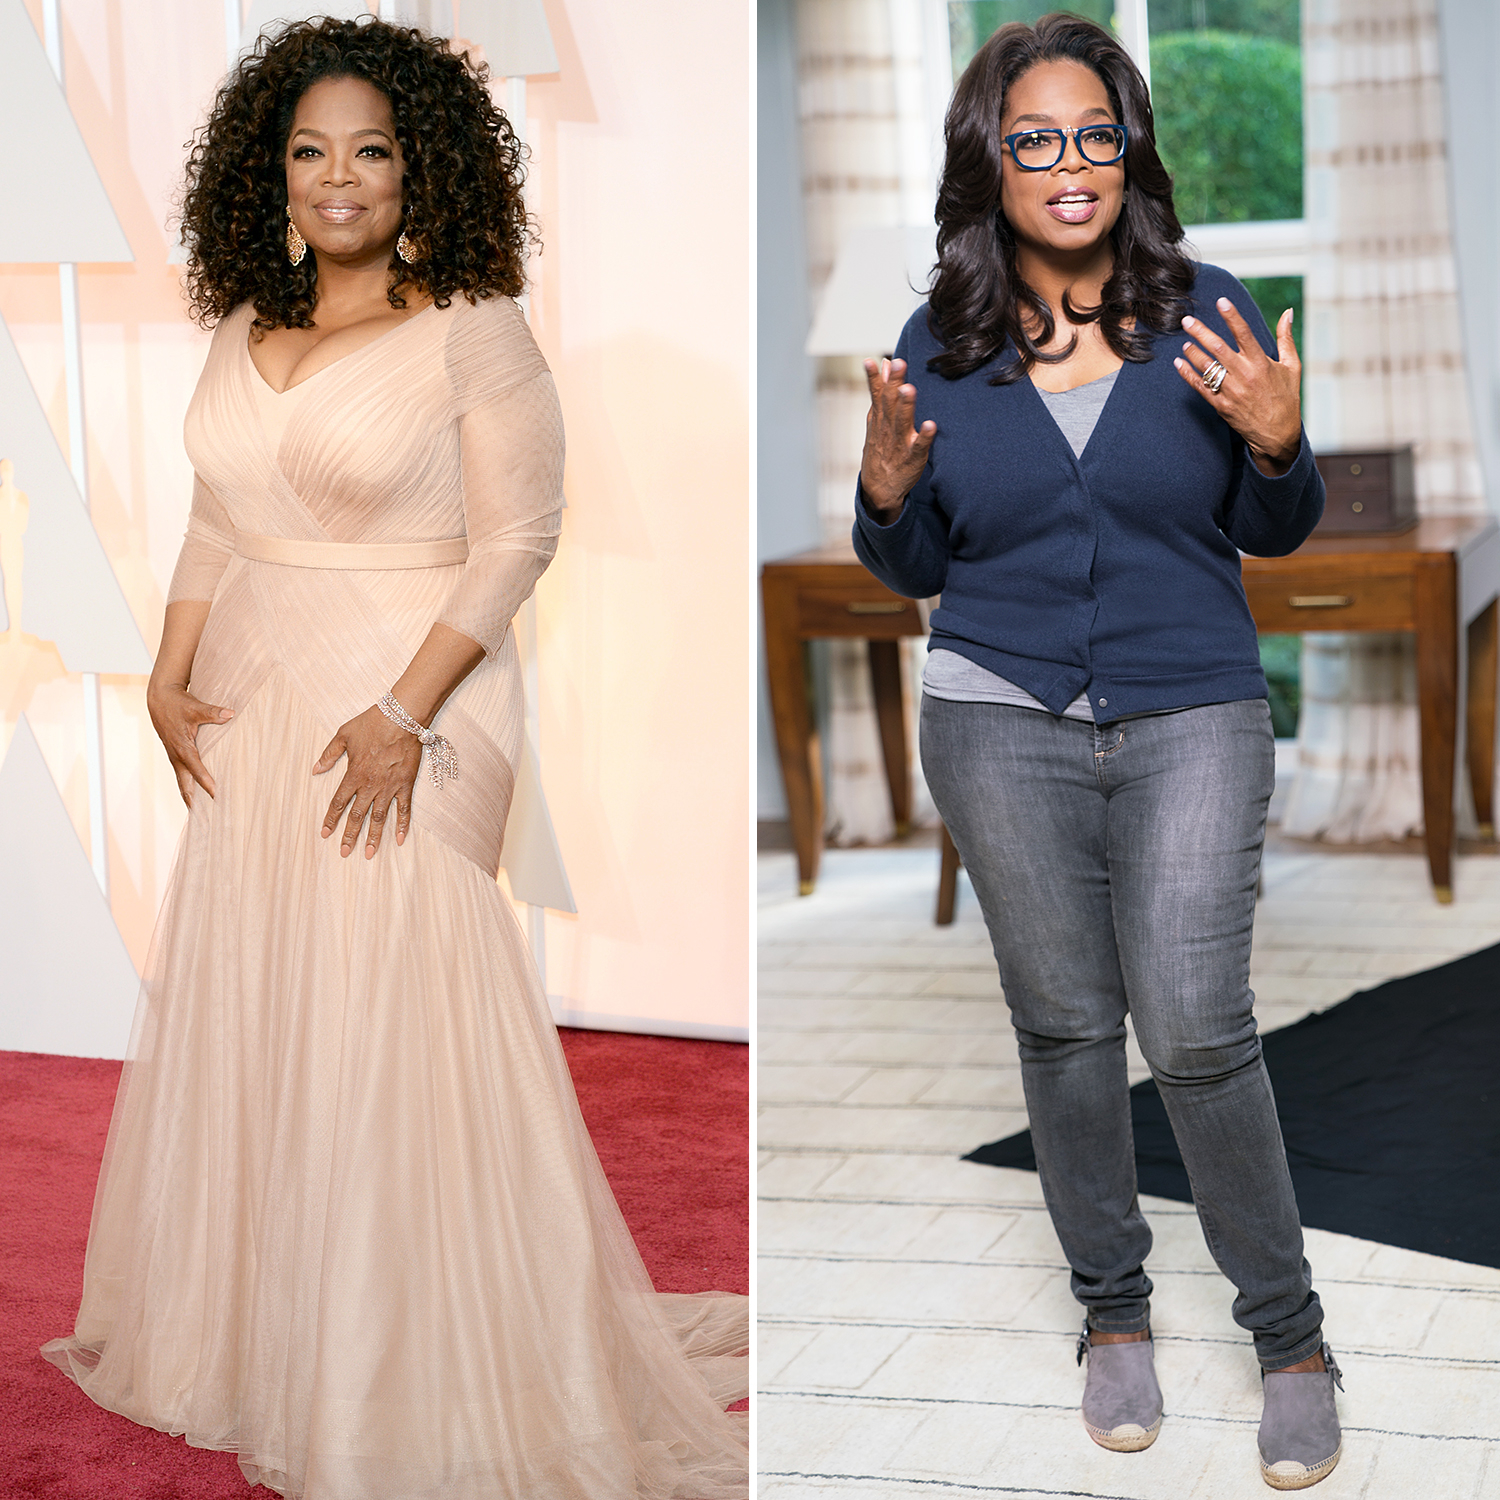 Oprah Reveals She’s Lost Over 40 Pounds on Weight Watchers